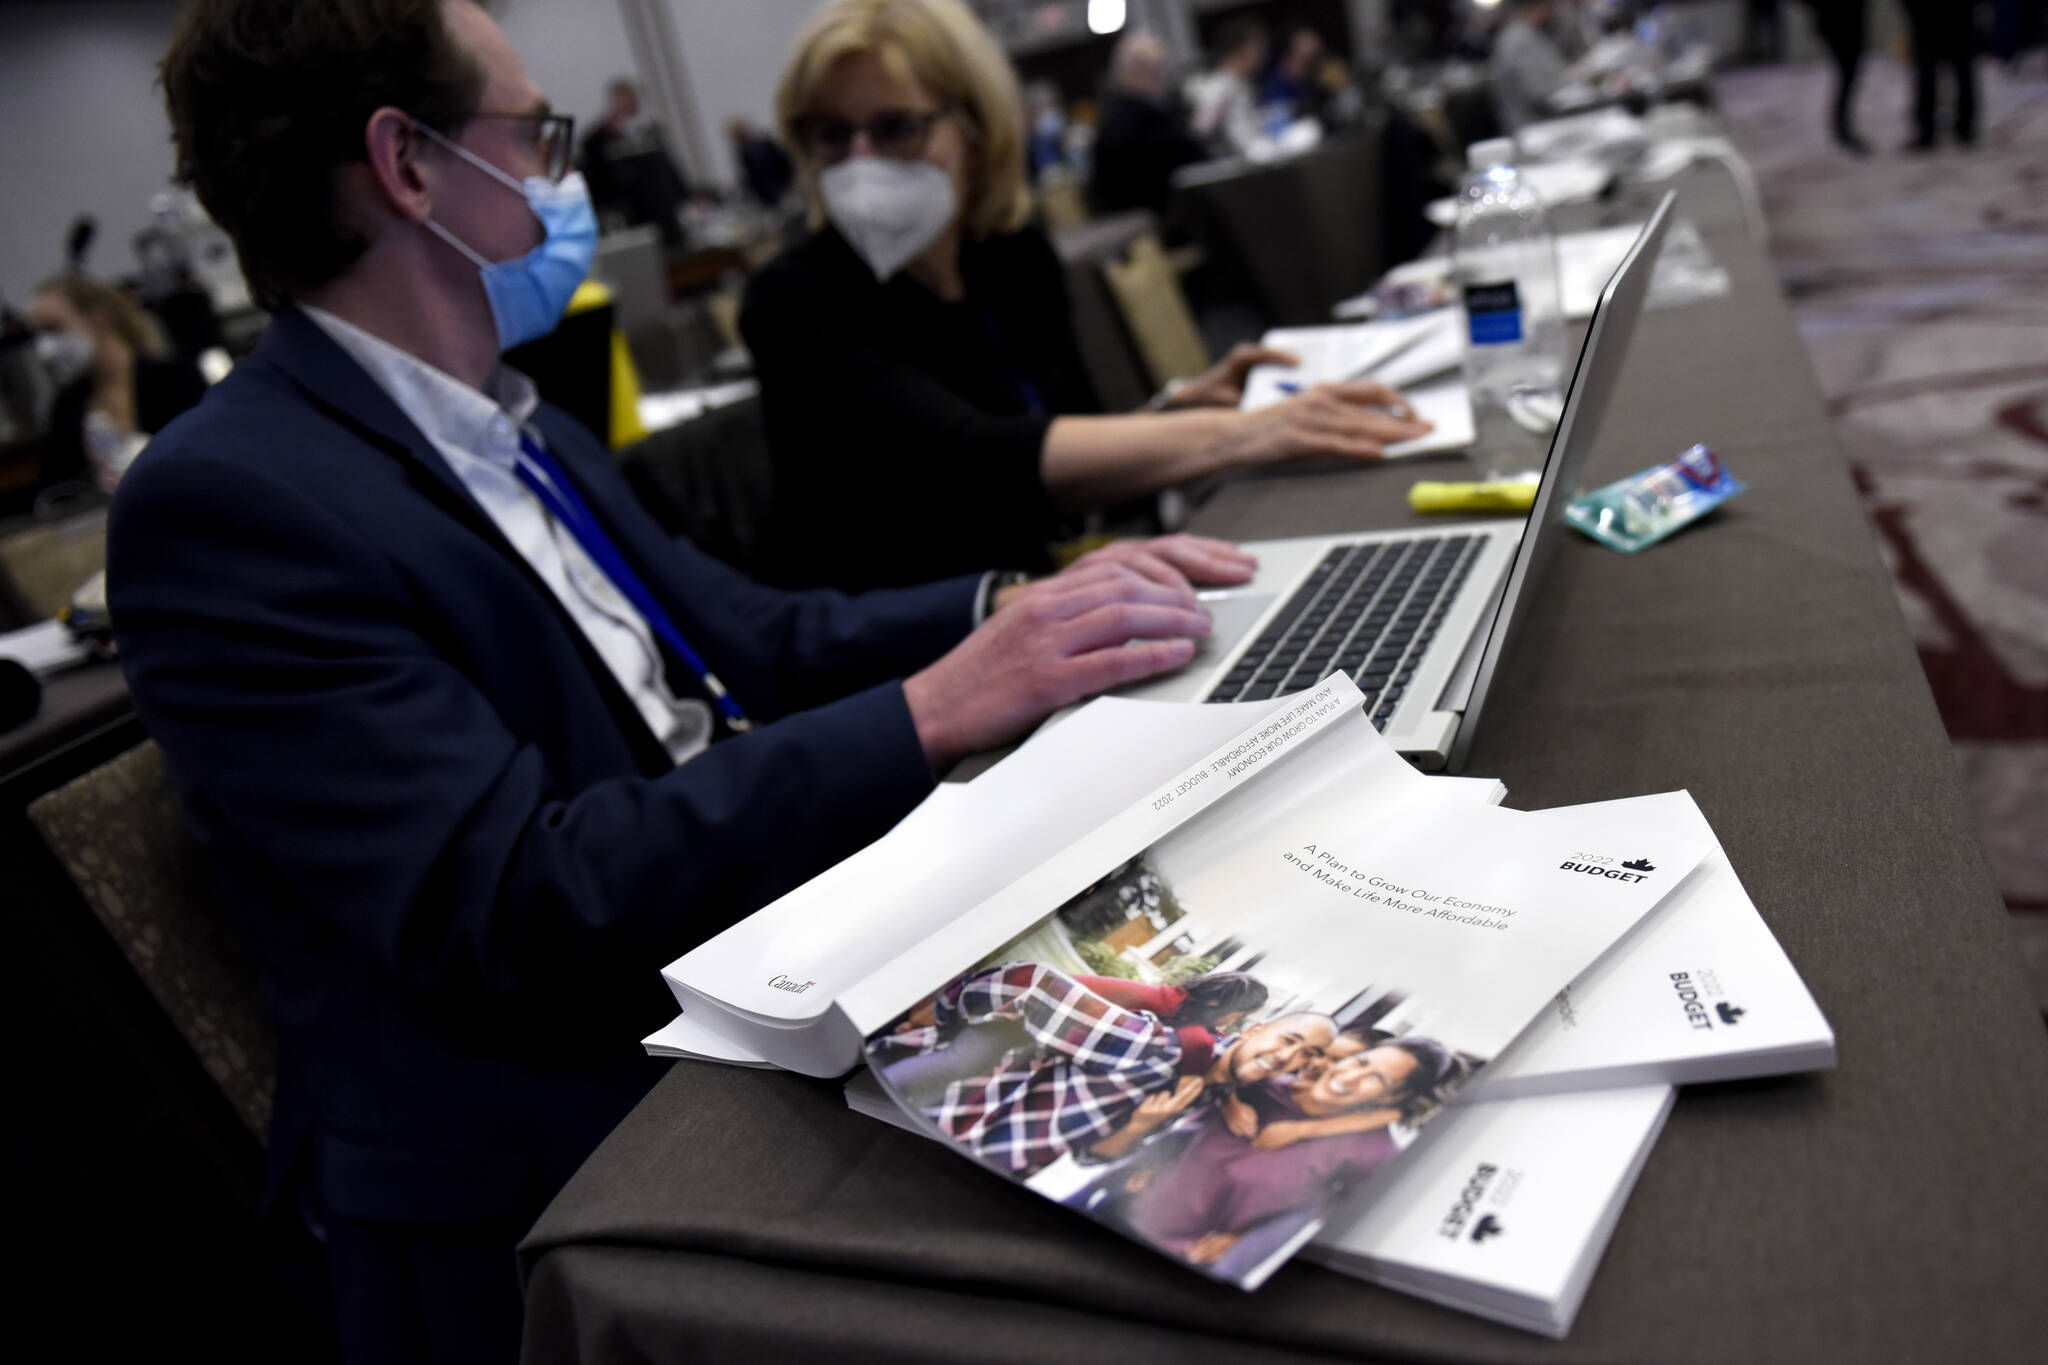 Copies of the 2022 federal budget are seen on a table as journalists work in the media lockup, ahead of the tabling of the federal budget, in Ottawa, on Thursday, April 7, 2022. THE CANADIAN PRESS/Justin Tang